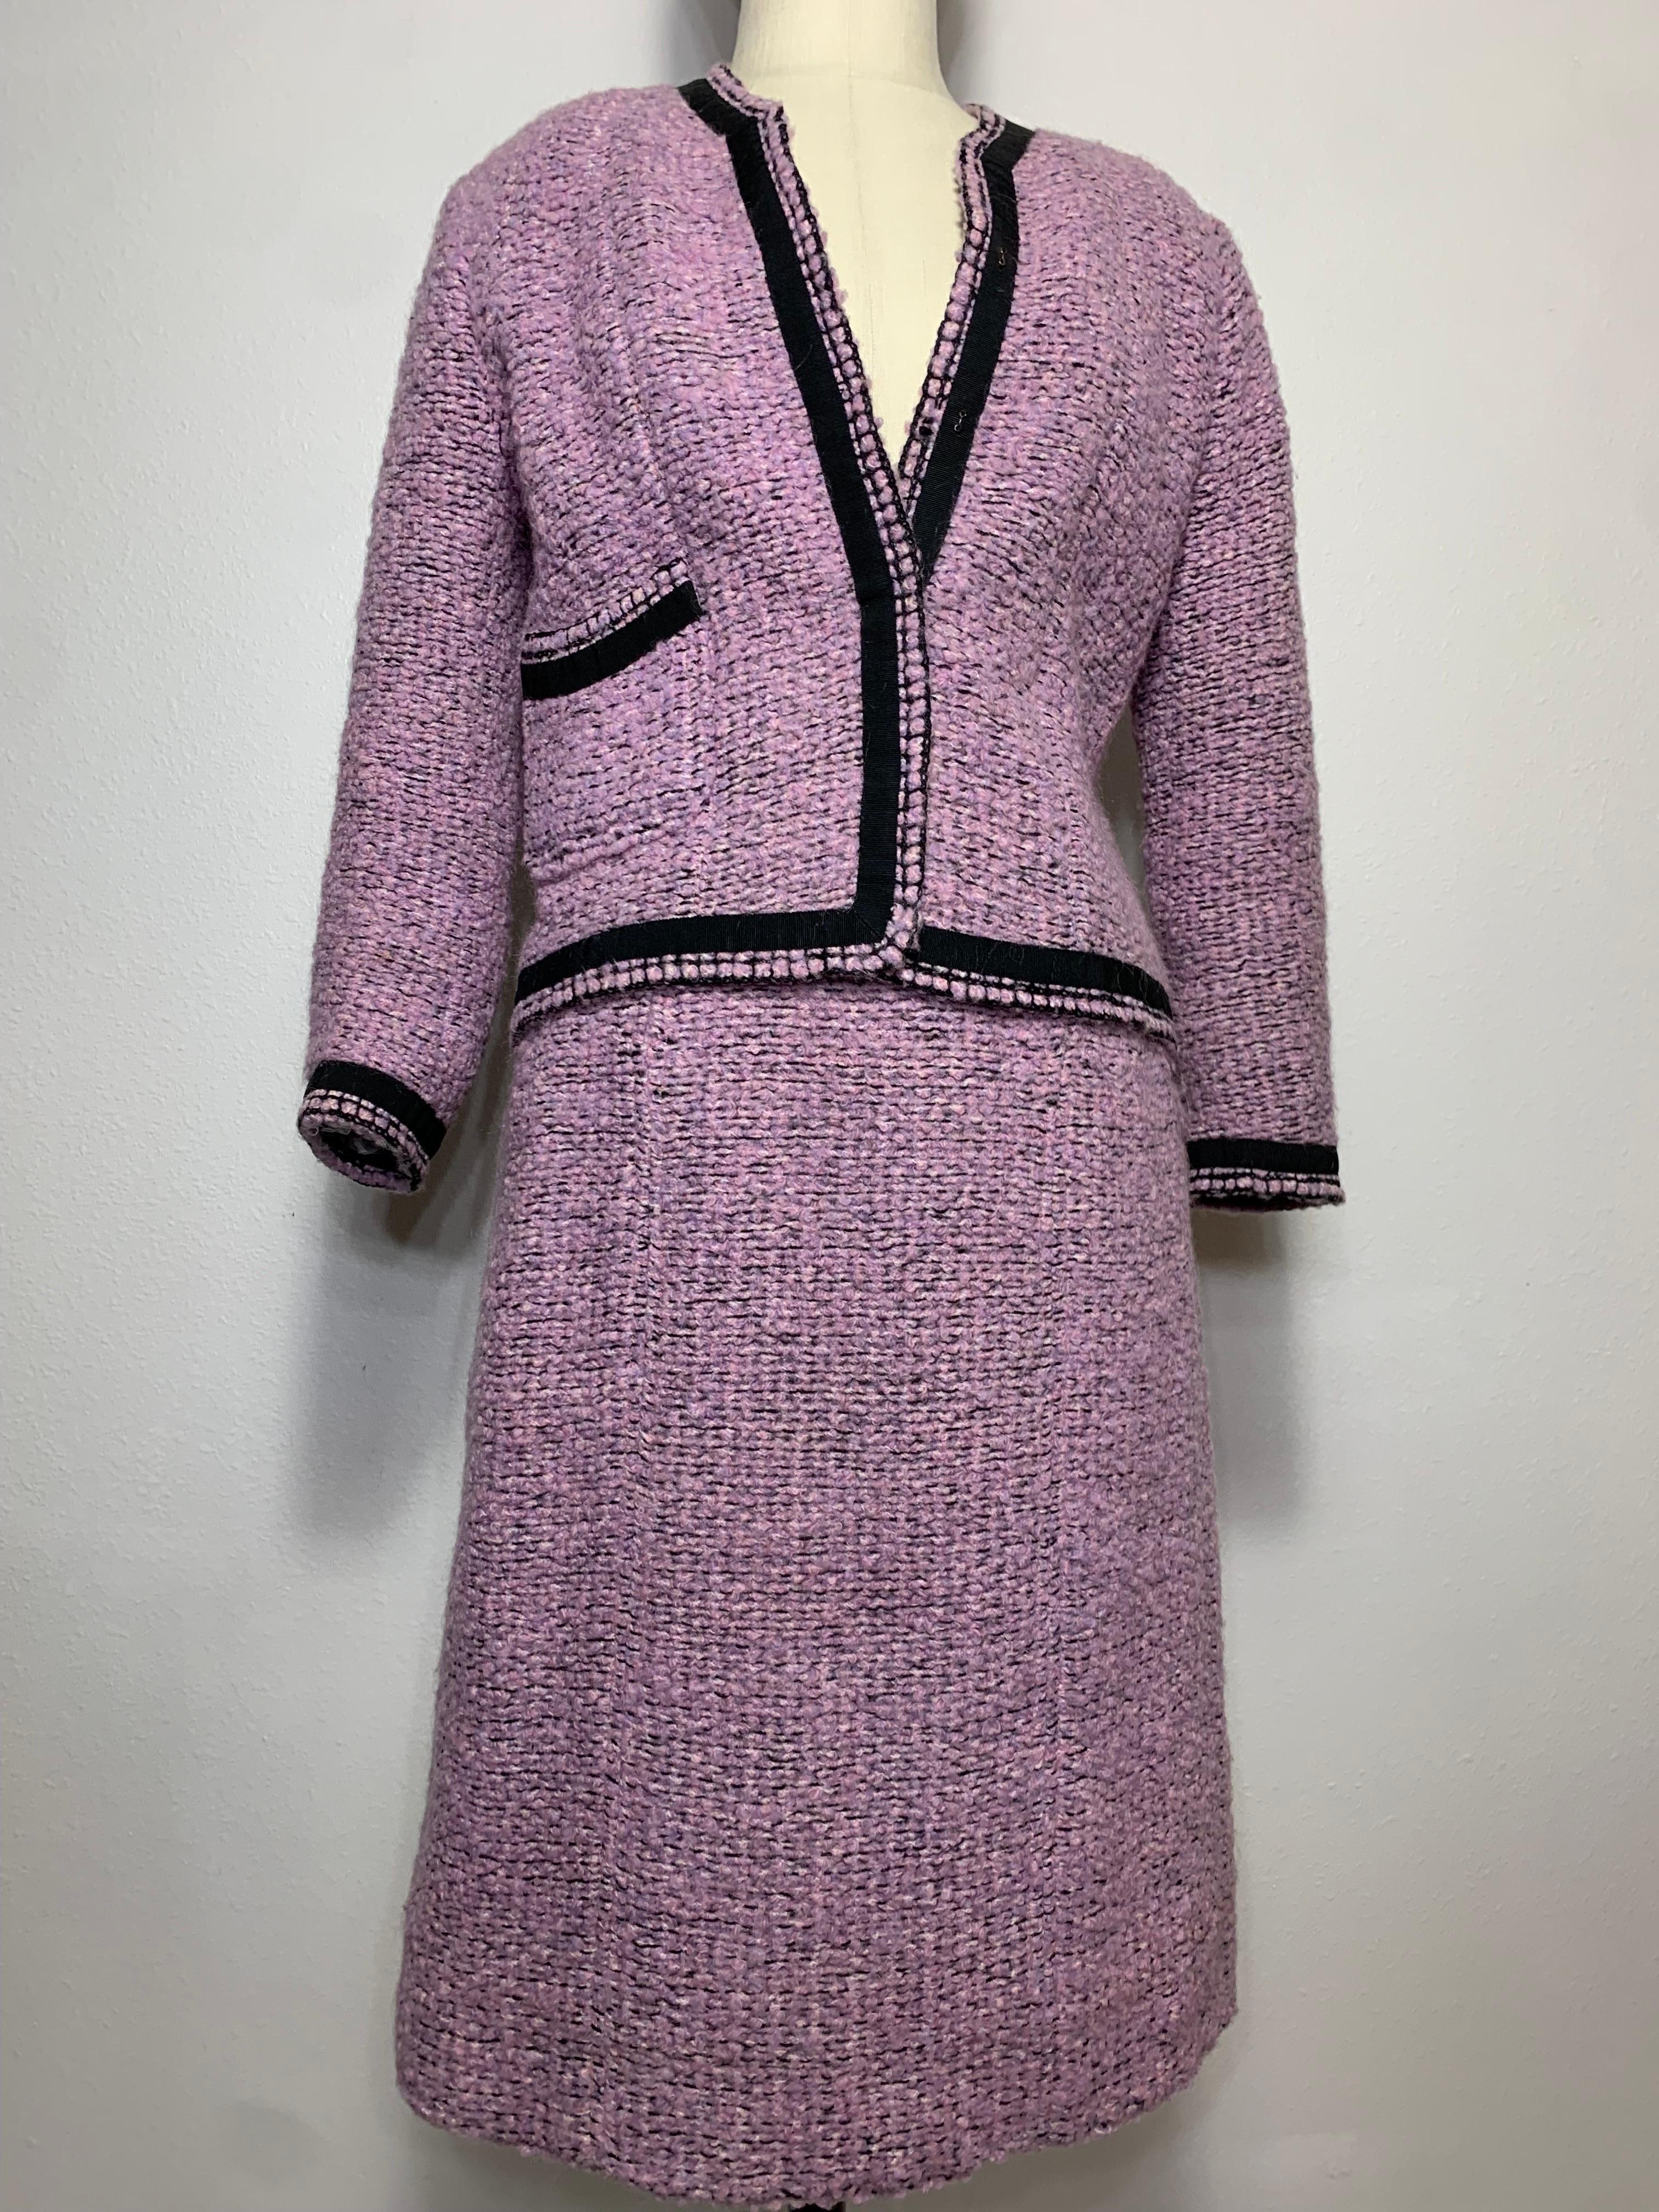 1960 Autumn/Winter Chanel Haute Couture Documented Lavender Tweed Skirt Suit  For Sale 7